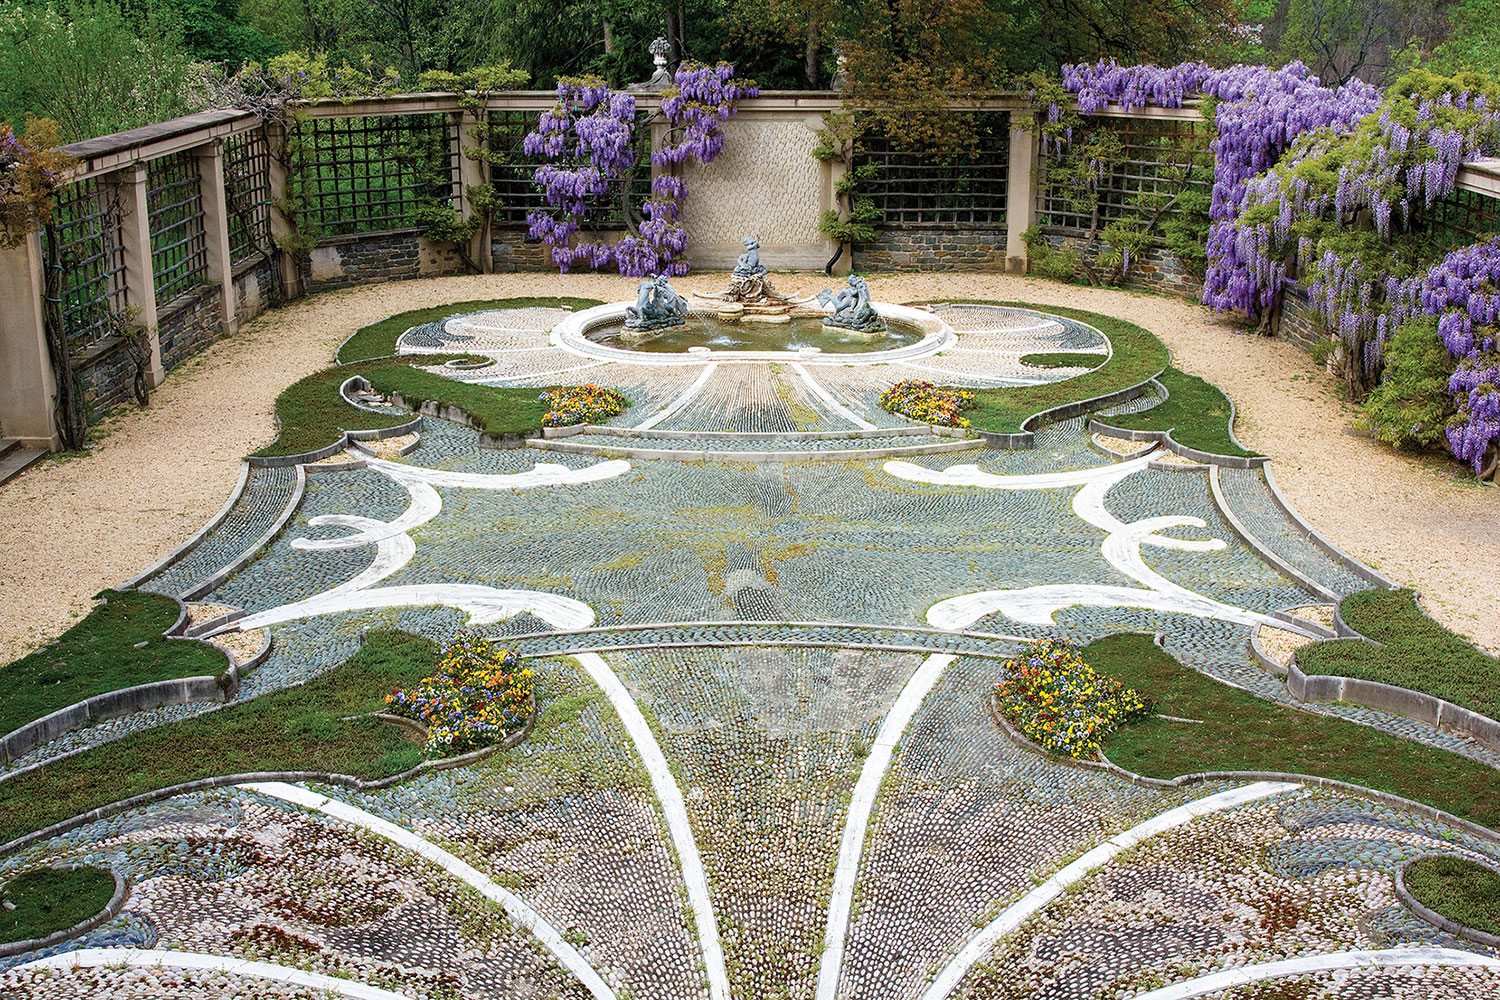 Intricate pebble hardscape featuring curvy inlays of grass and plantings, anchored by a fountain at one end.